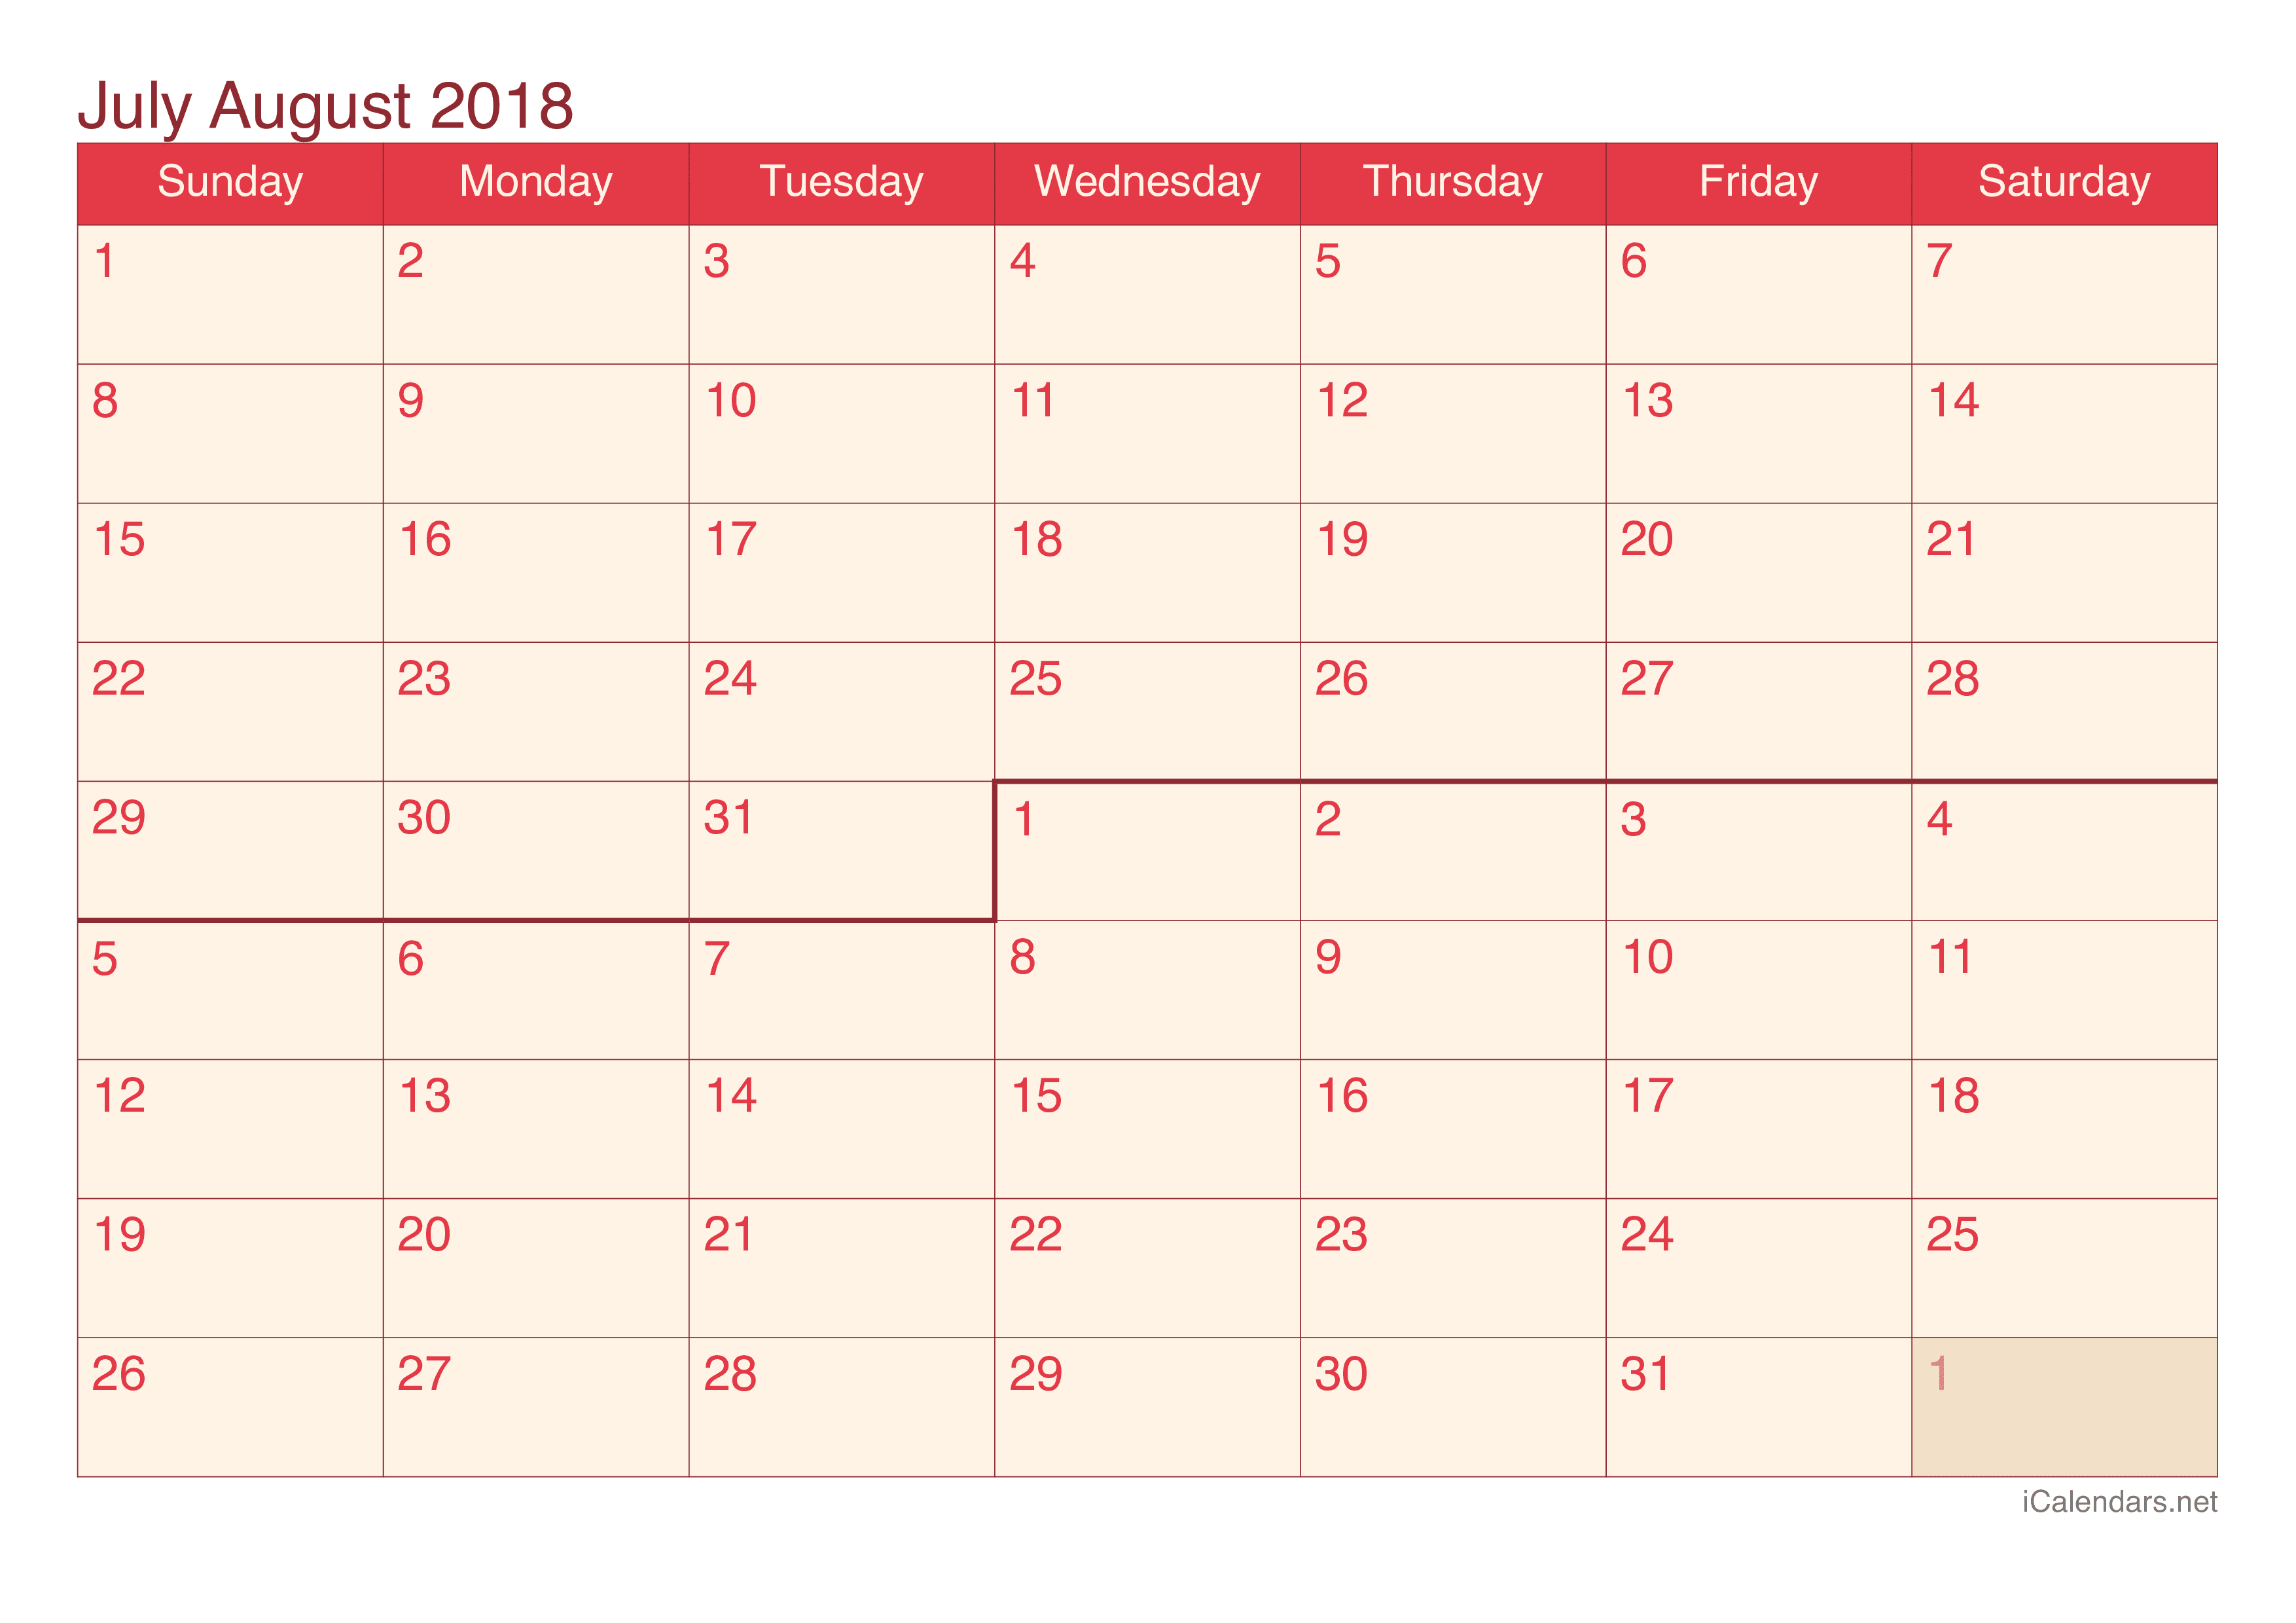 July and August 2018 Printable Calendar